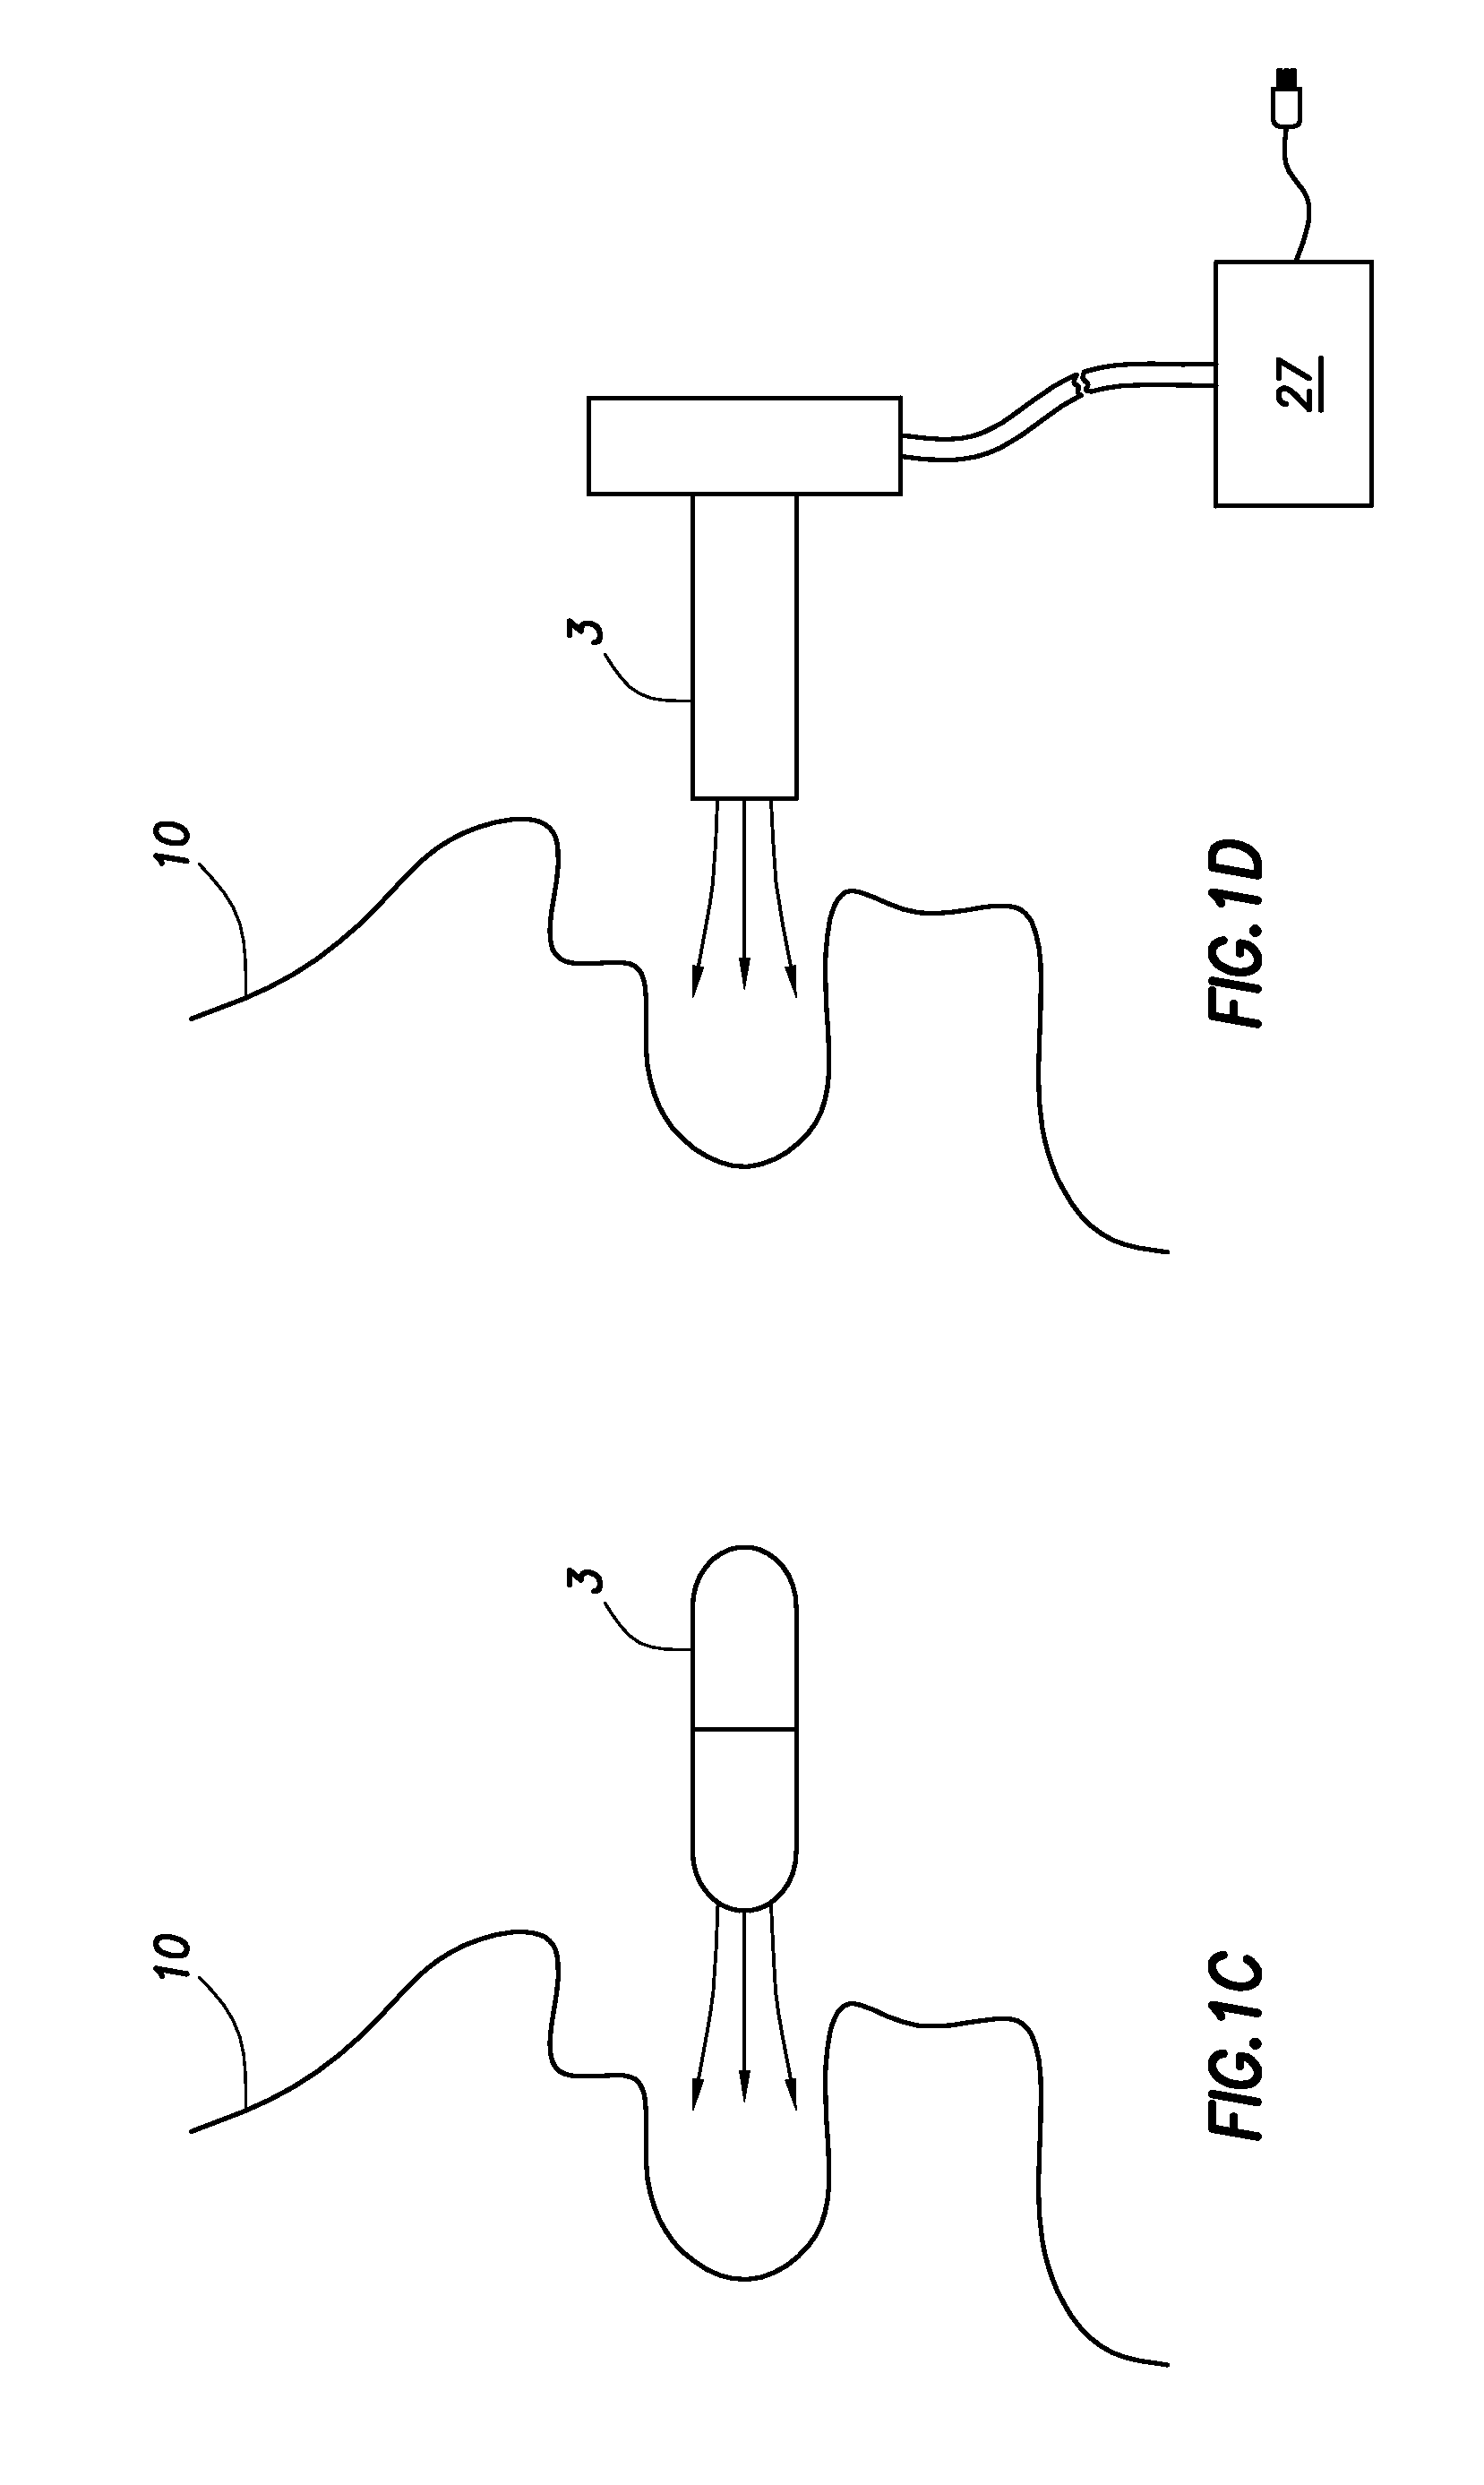 Apparatus, system and method for detection and delivery of a medicinal dose